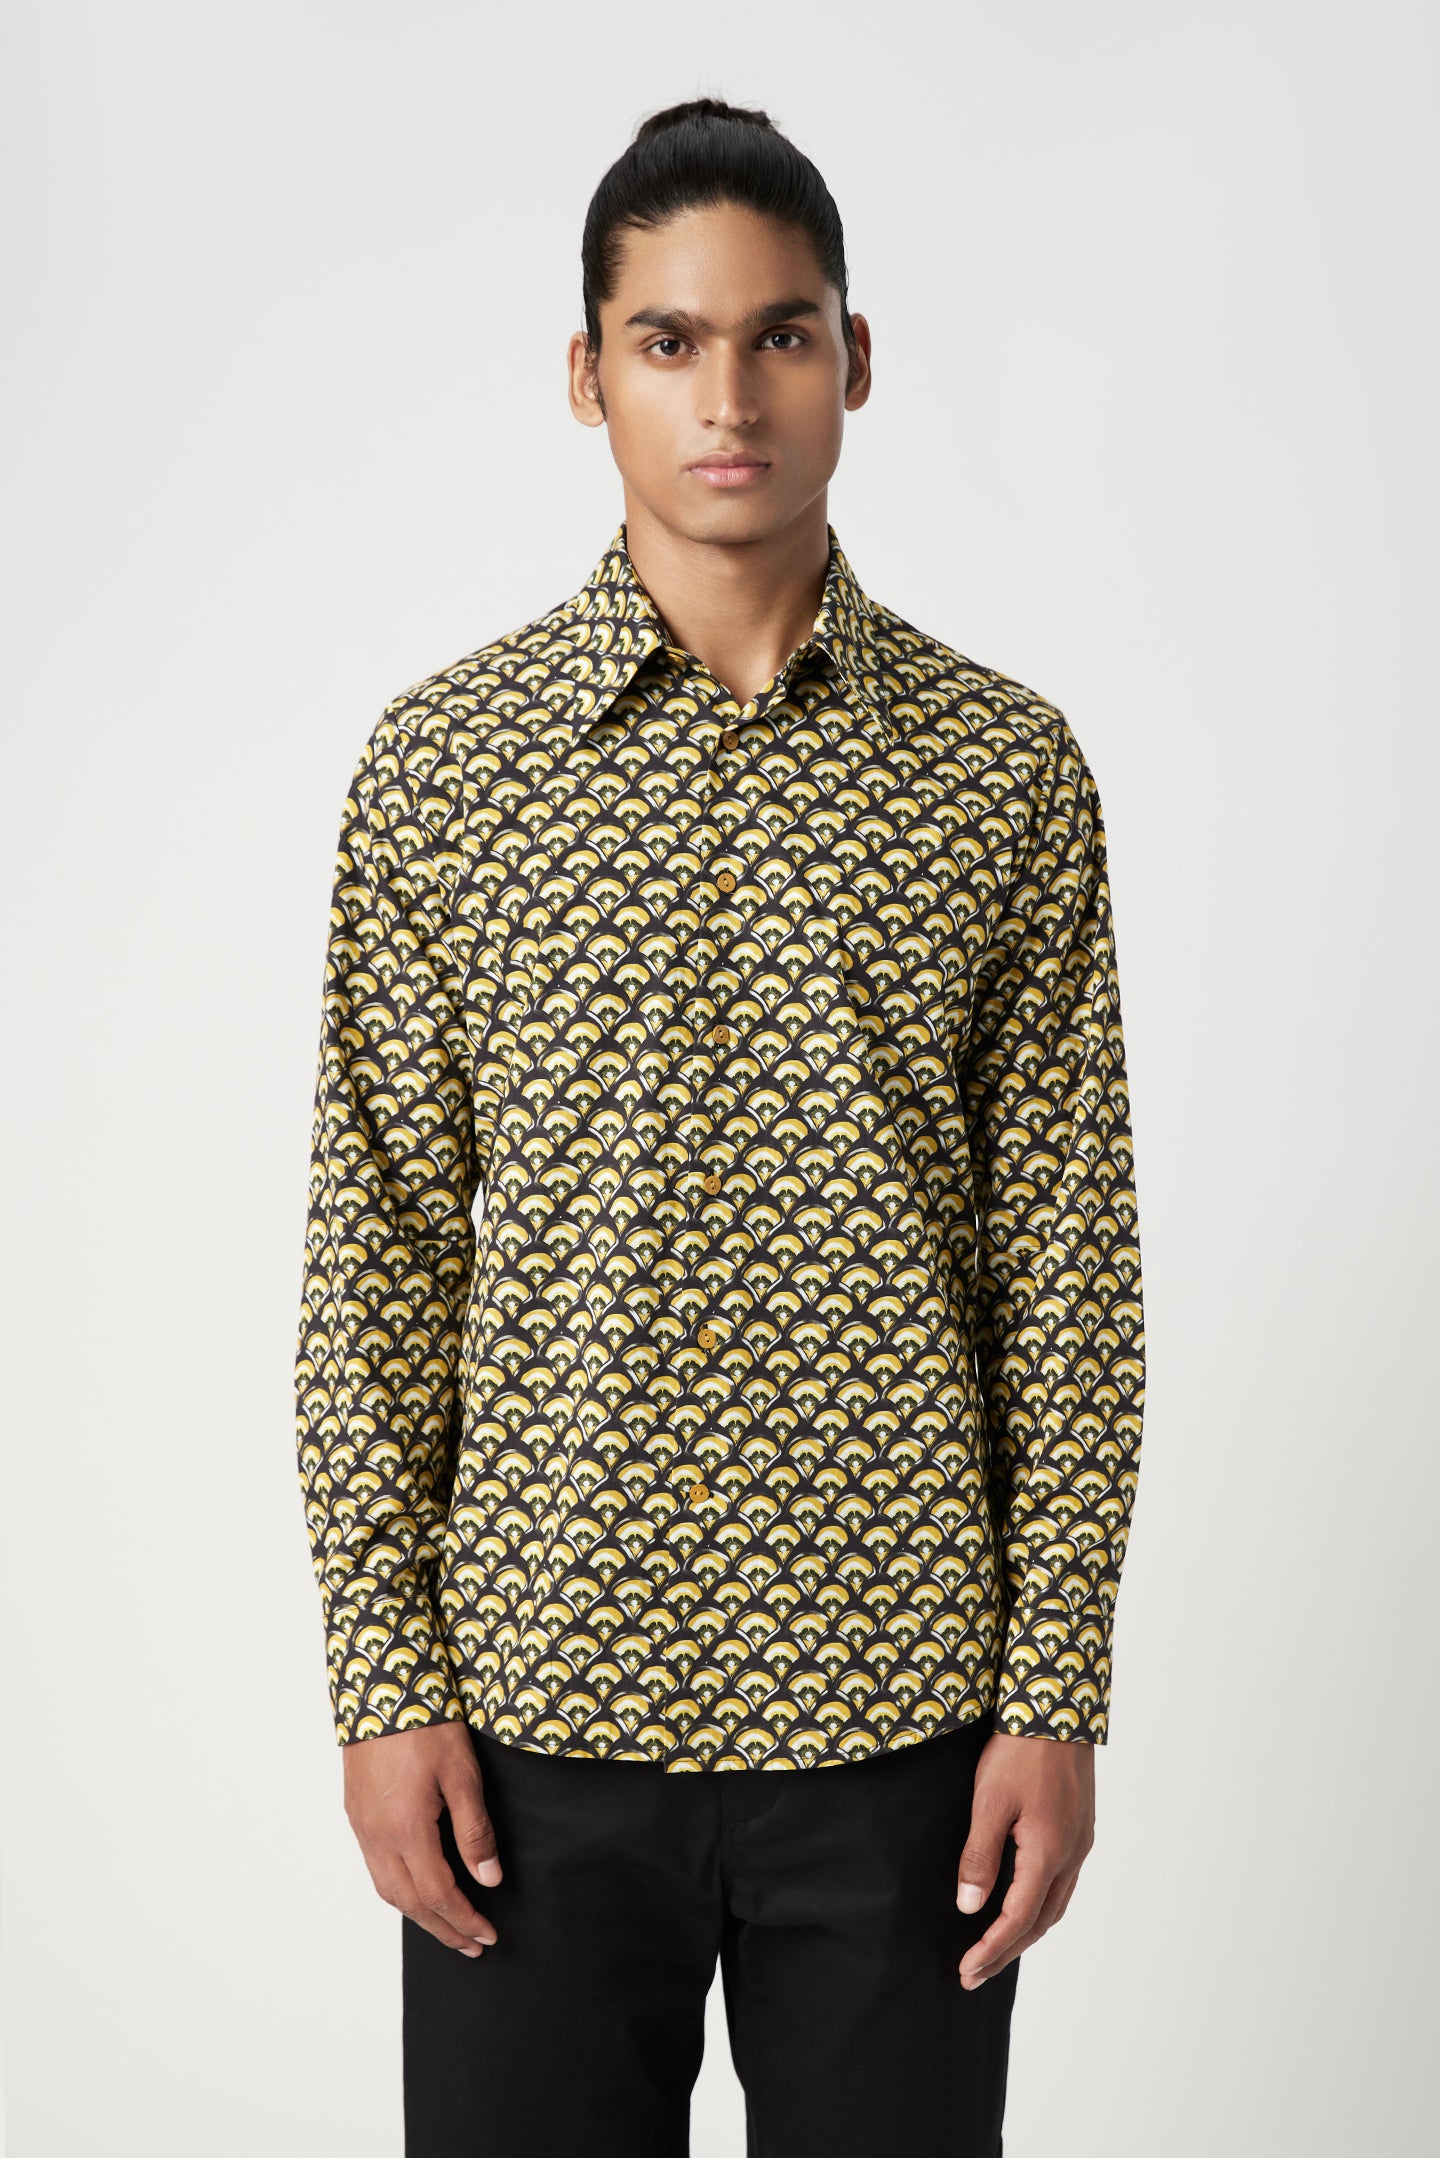 Regular Fit Button-Down Shirt in an All-Over Scallop Print